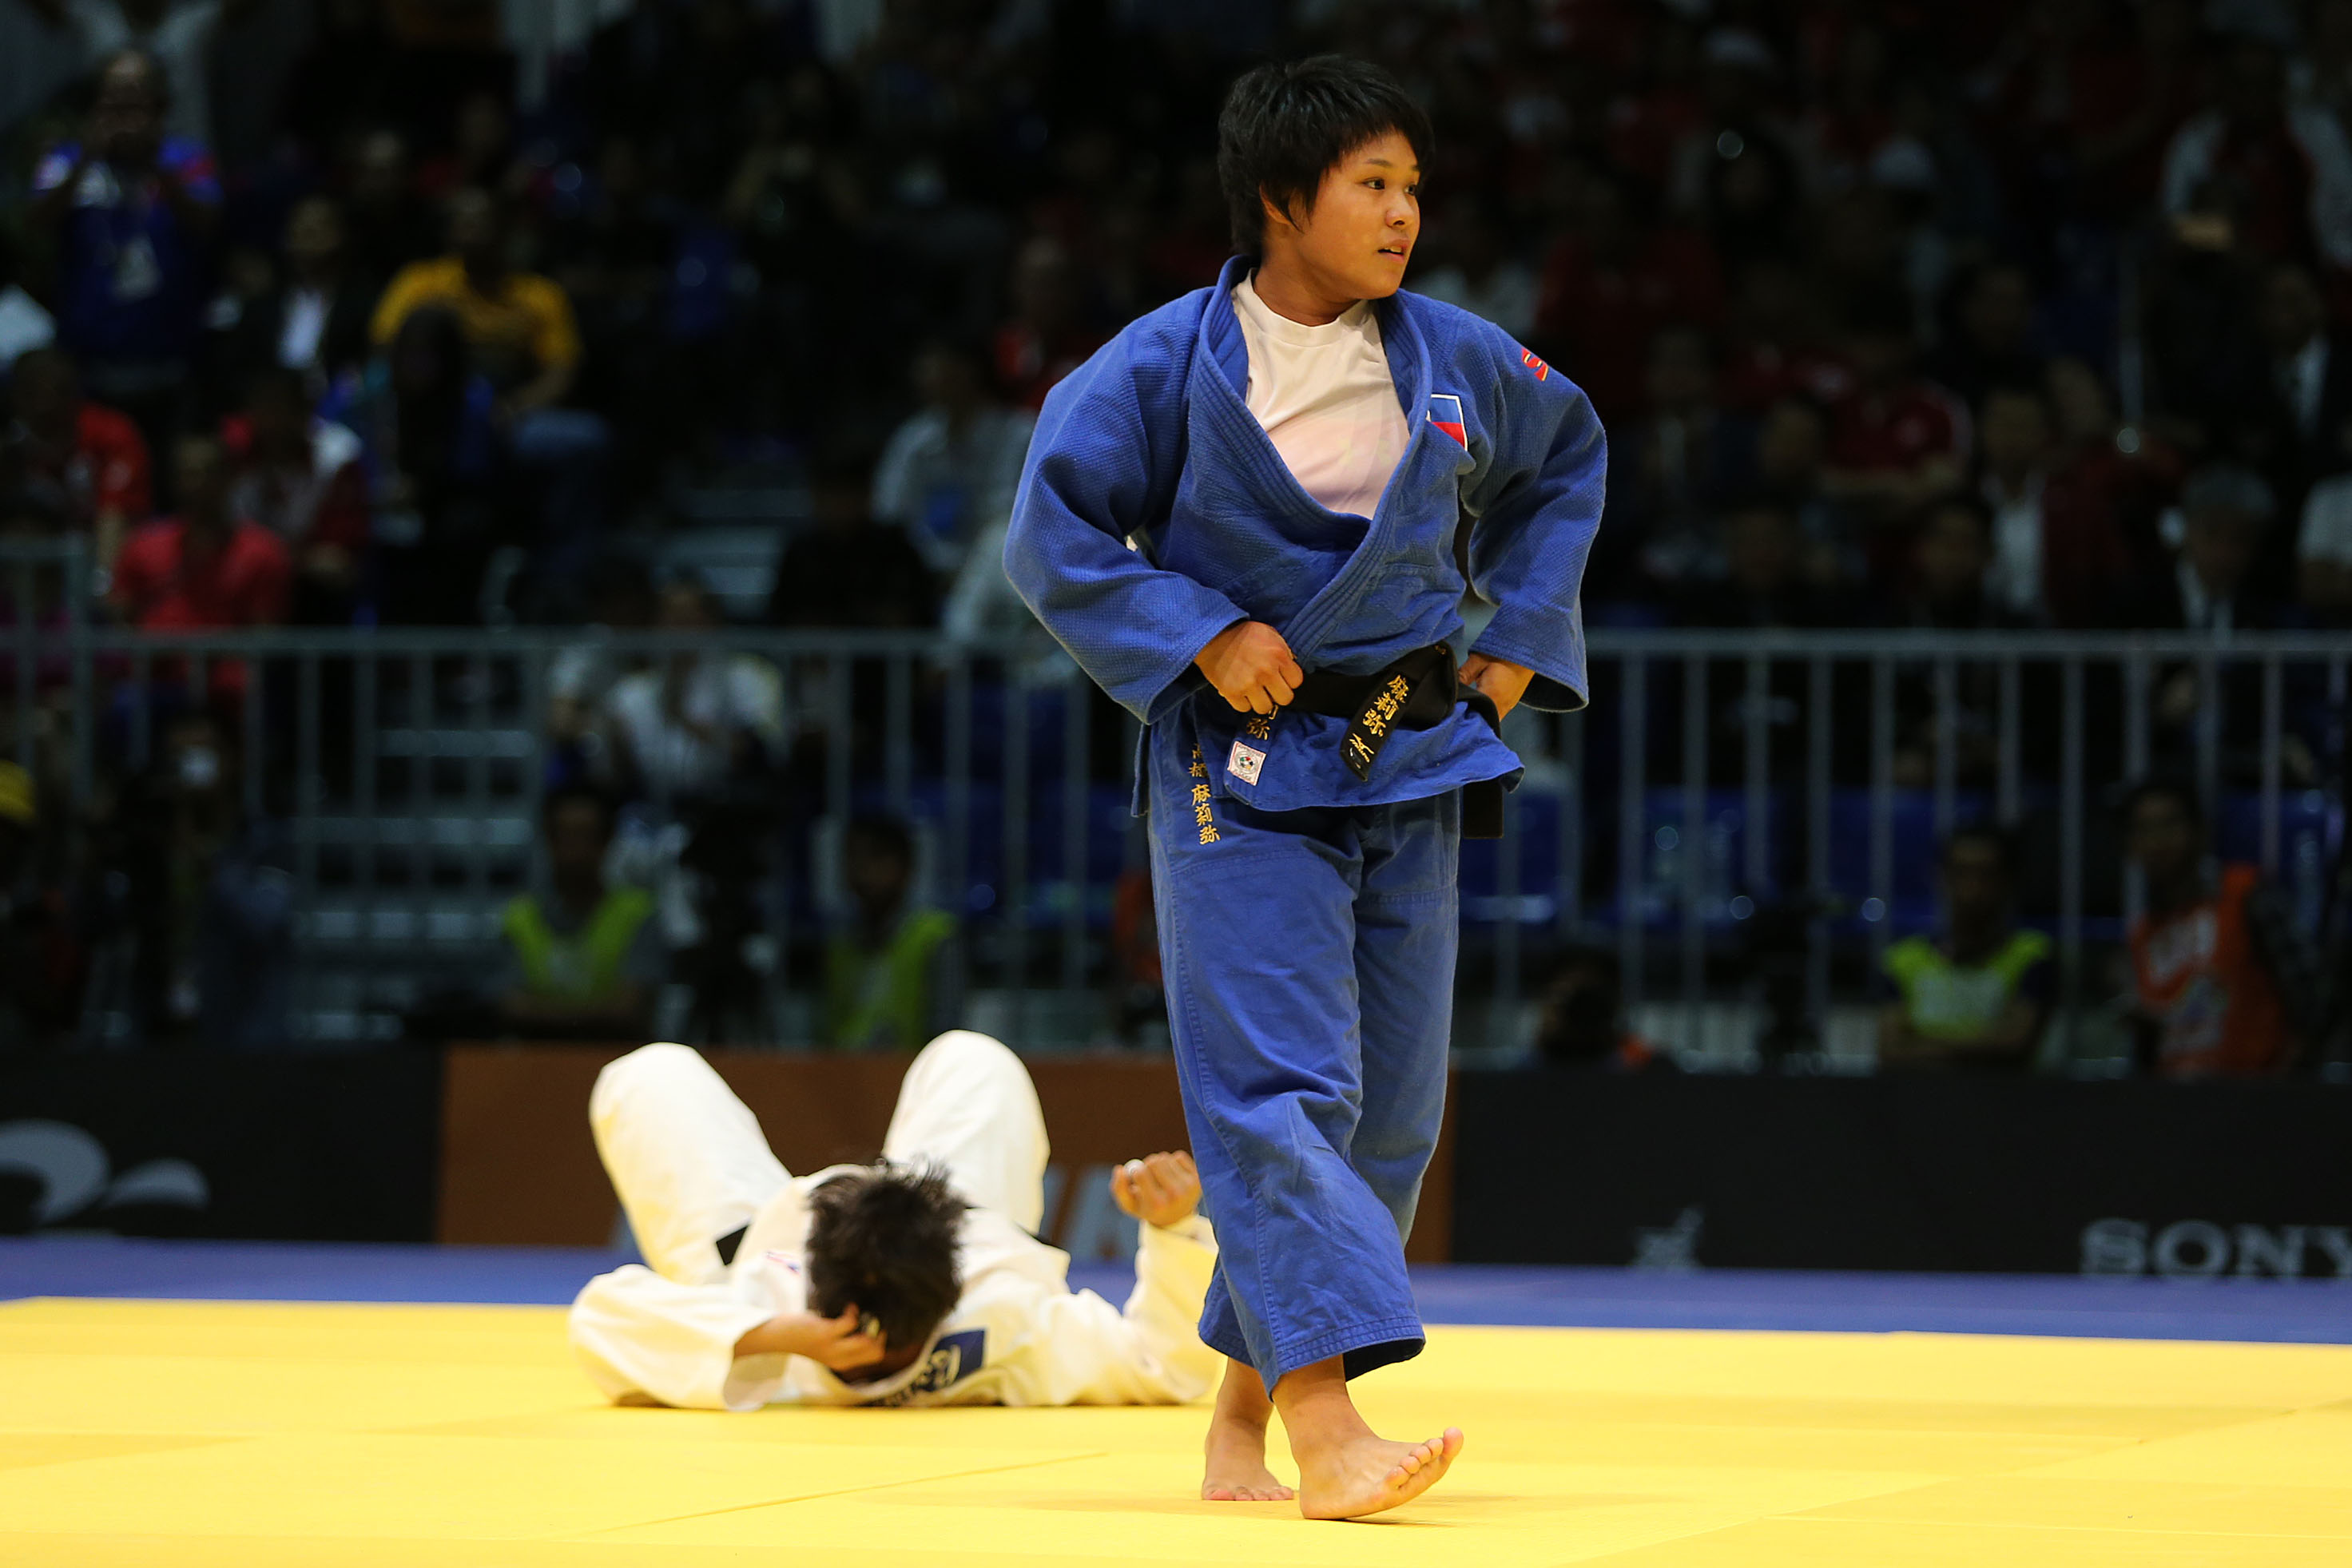 Mariya Takahashi of the Philippines competes against Surattana Thongsri of Thailand in the finals of the women's -70kg class of the 29th Southeast Asian Games judo competition at the Kuala Lumpur Convention Center Hall 5. Takahashi prevailed via ippon in 48 seconds to win the gold medal. CONTRIBUTED PHOTO/SEA GAMES MEDIA POOL